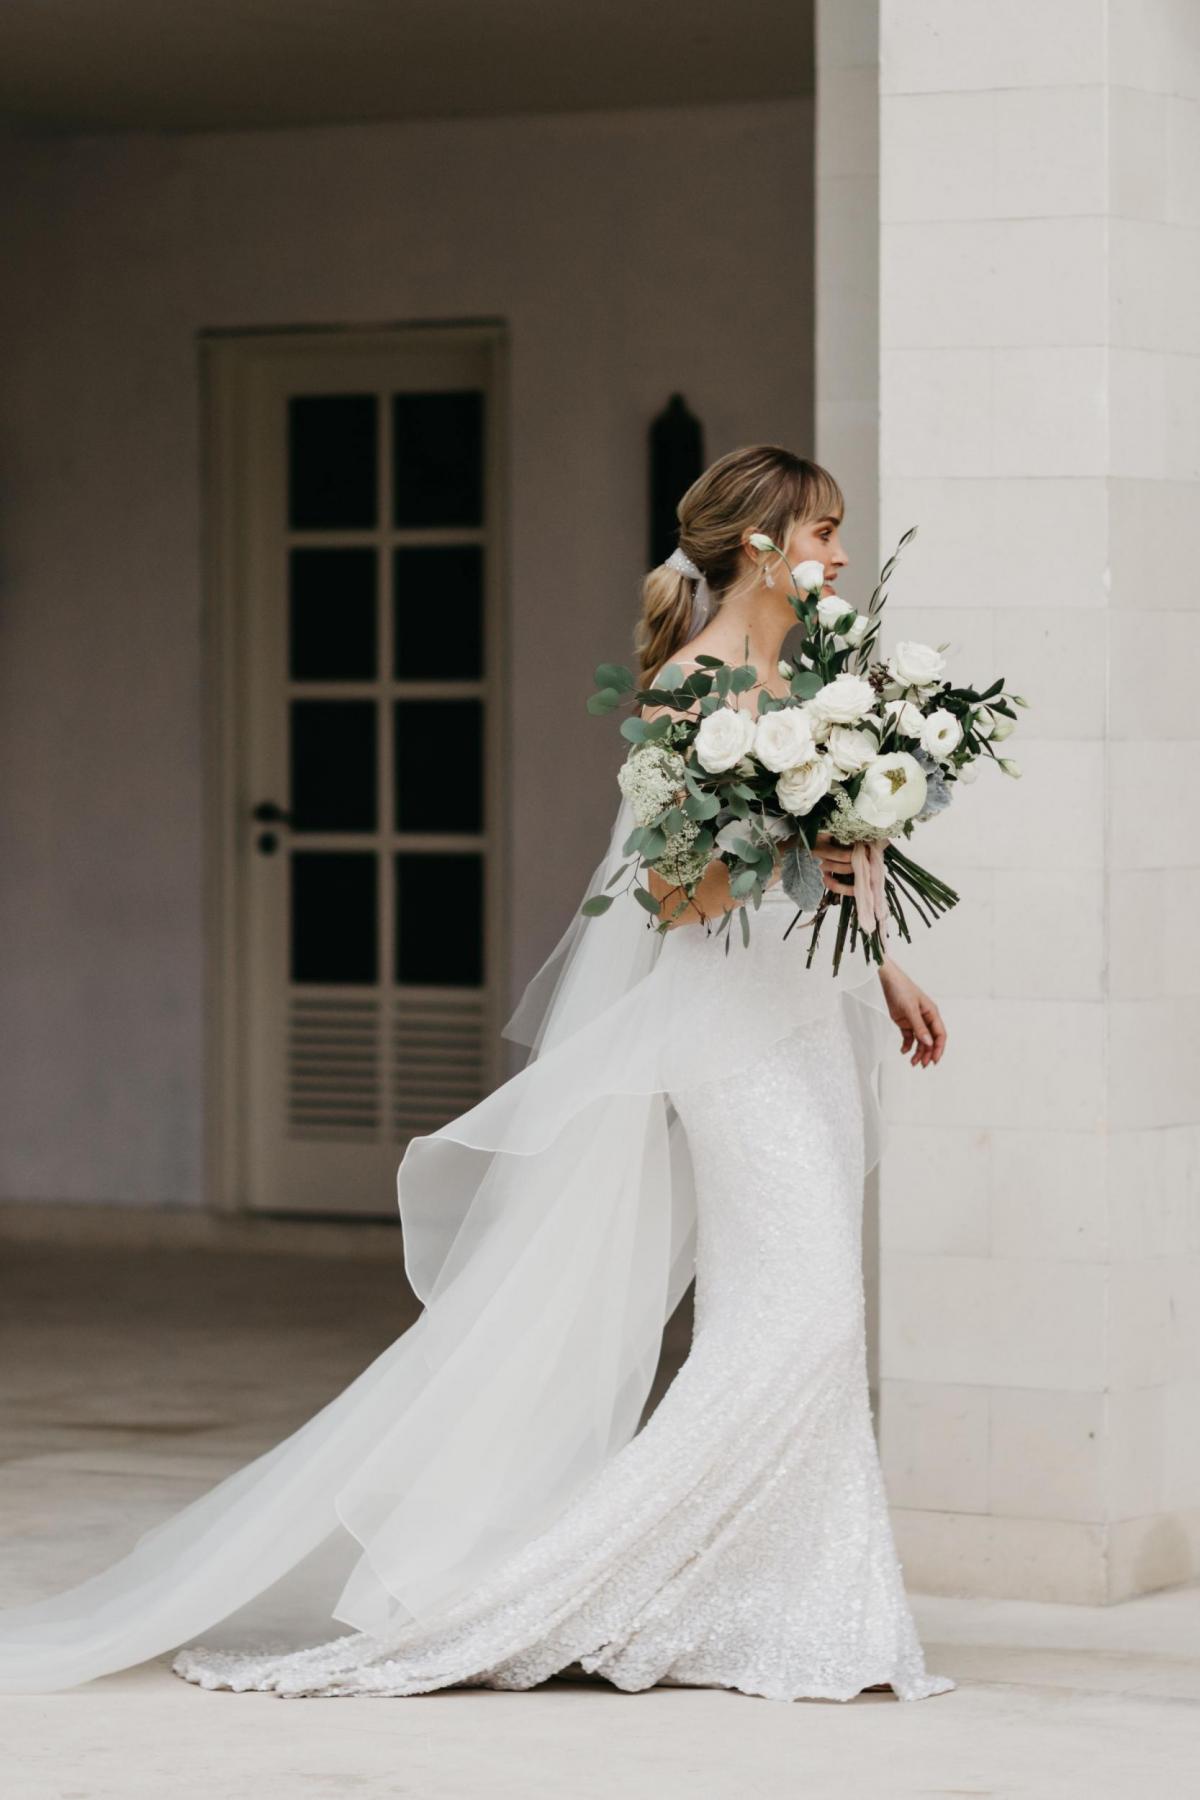 Read all about our real bride's wedding in this blog. She wore the Luxe Anya wedding dress by Karen Willis Holmes.